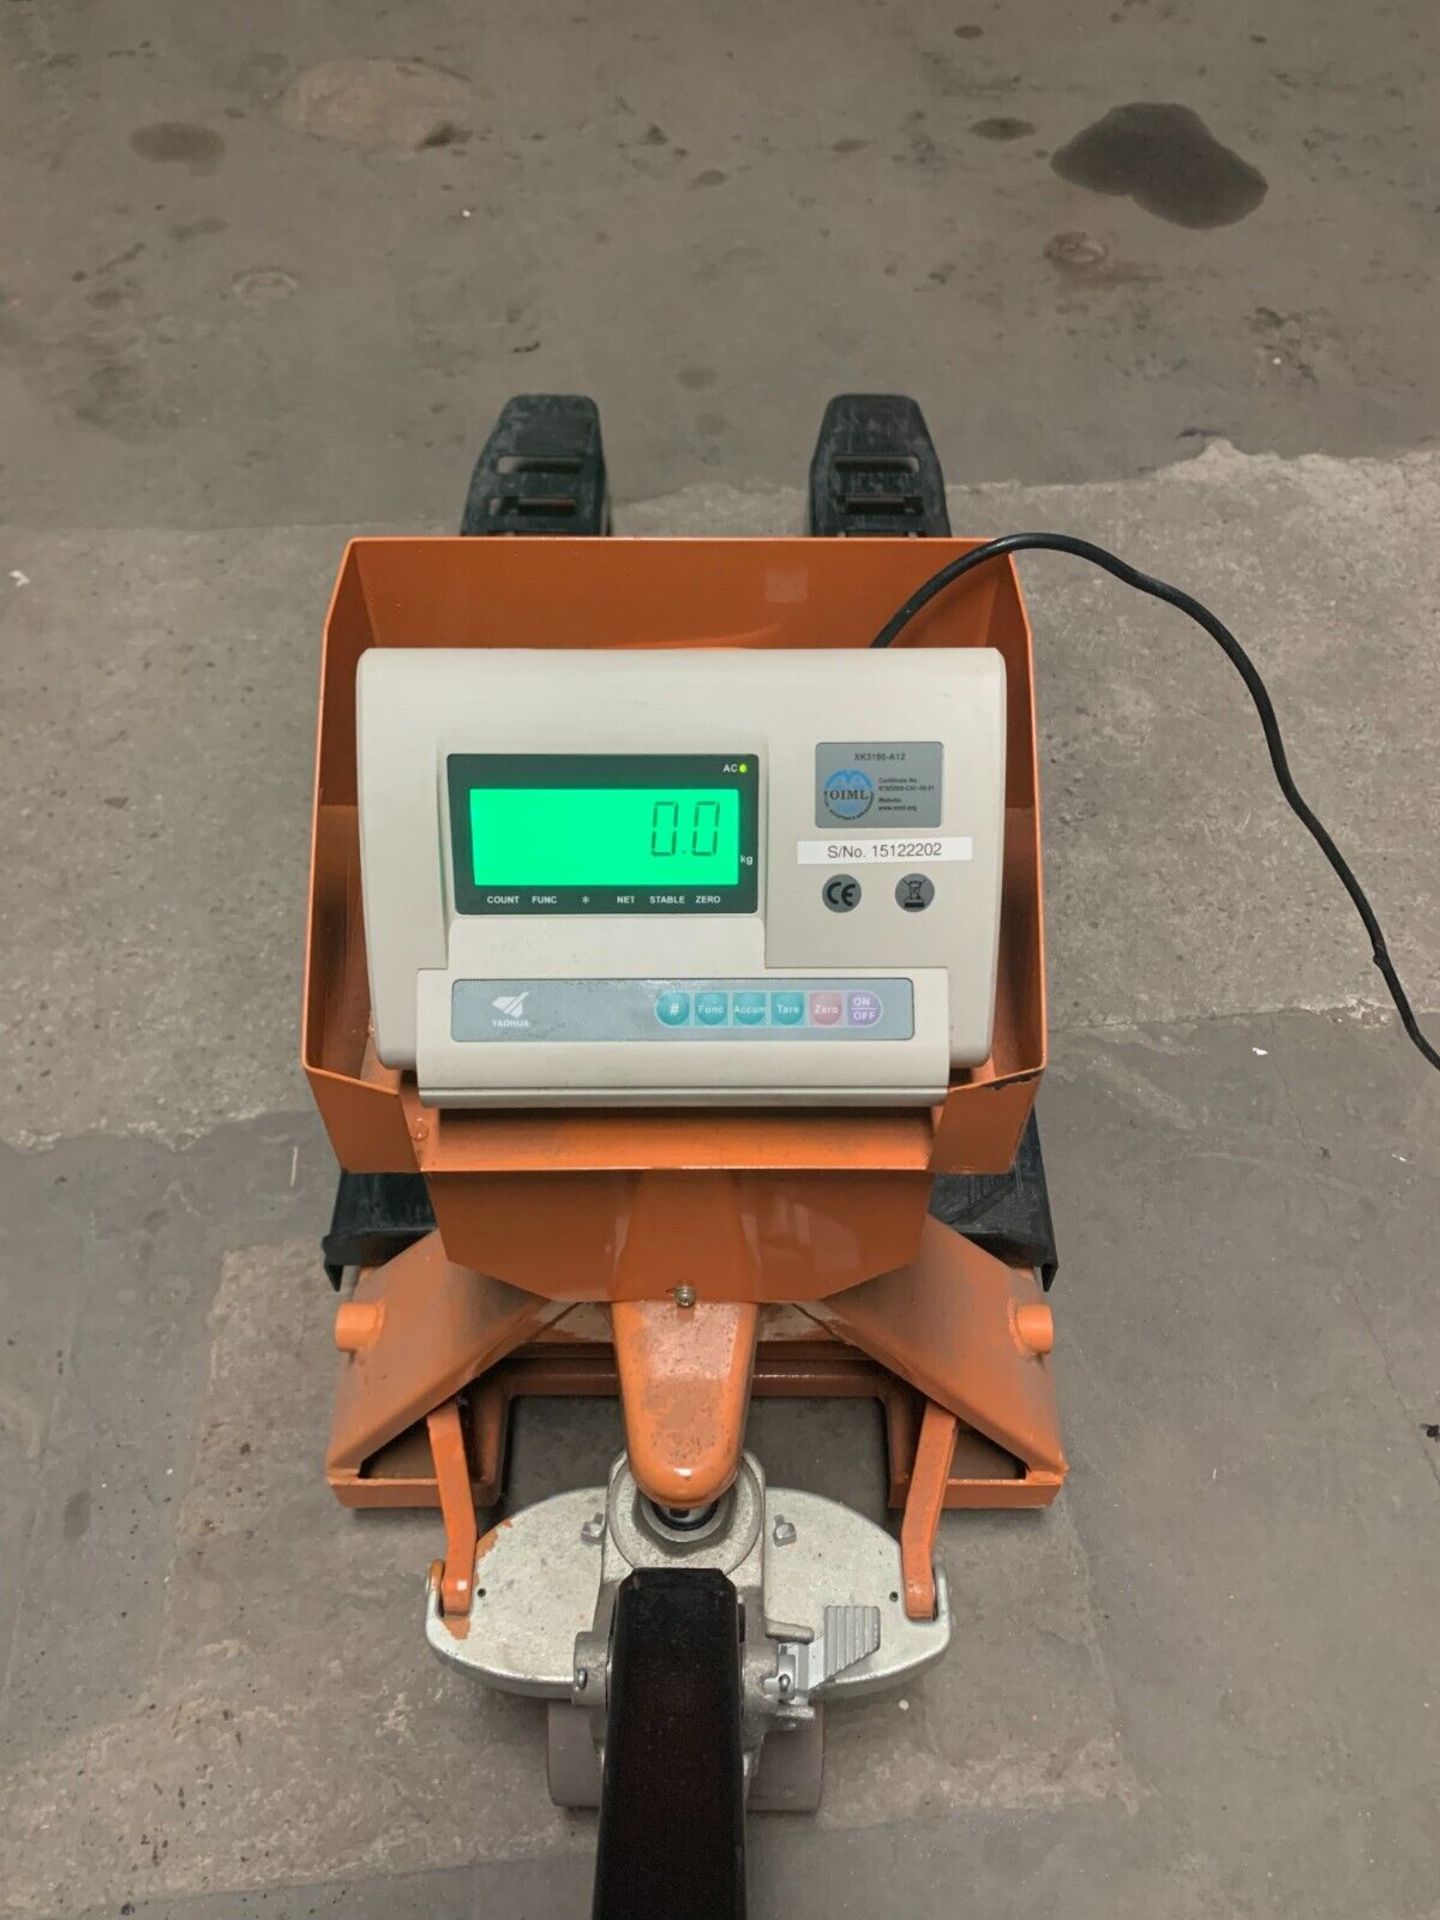 INDUSTRIAL WEIGHING PALLET TRUCK SCALE YOAHUA